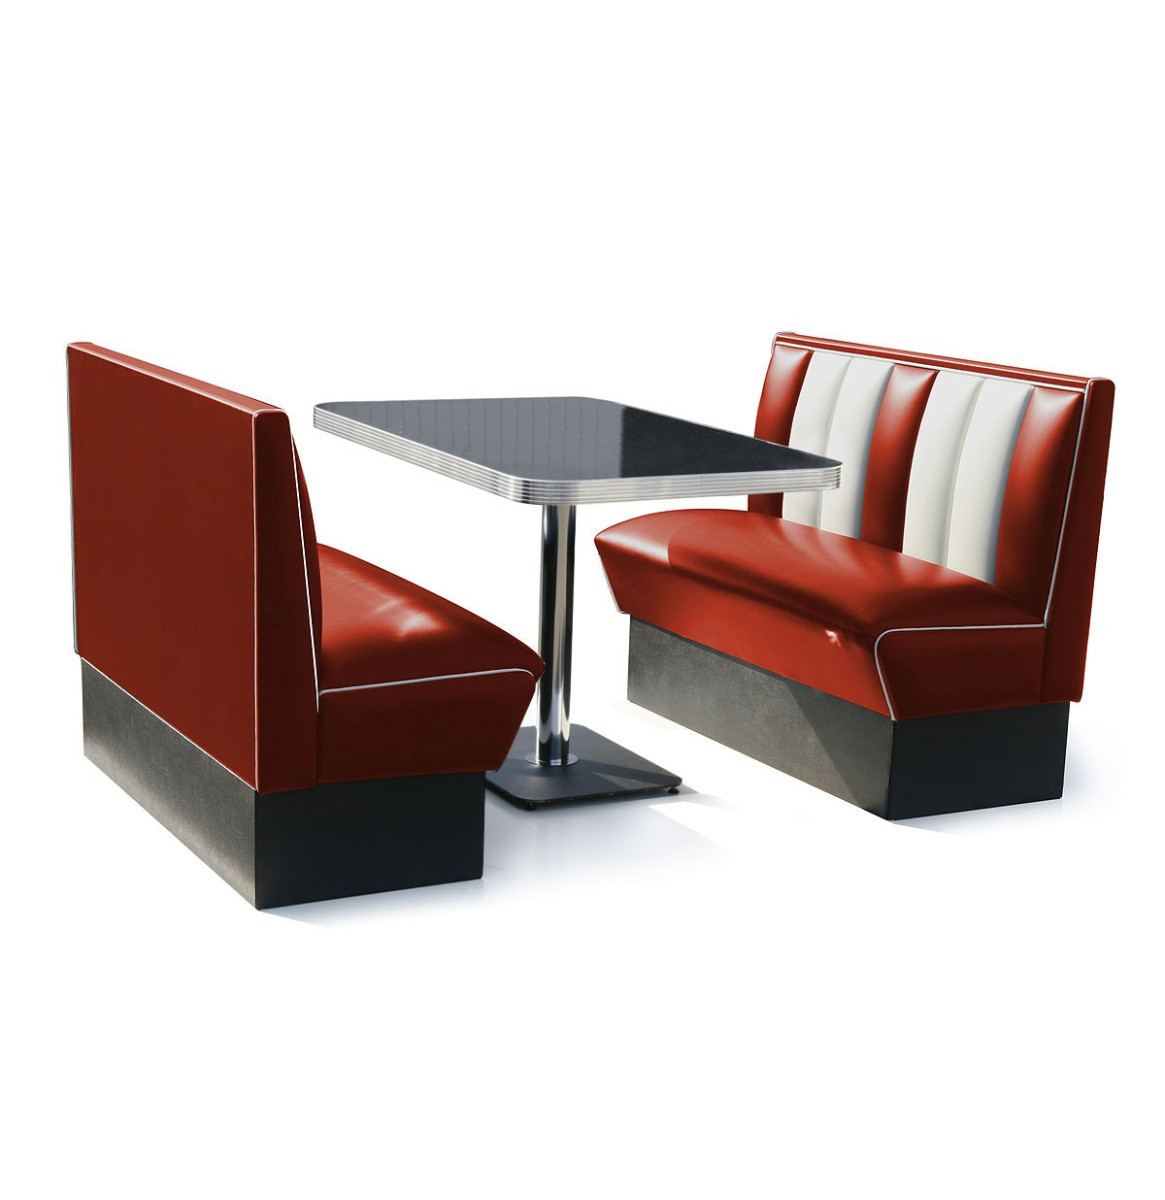 2 x Classic Dinerbooth Ruby + Tafel